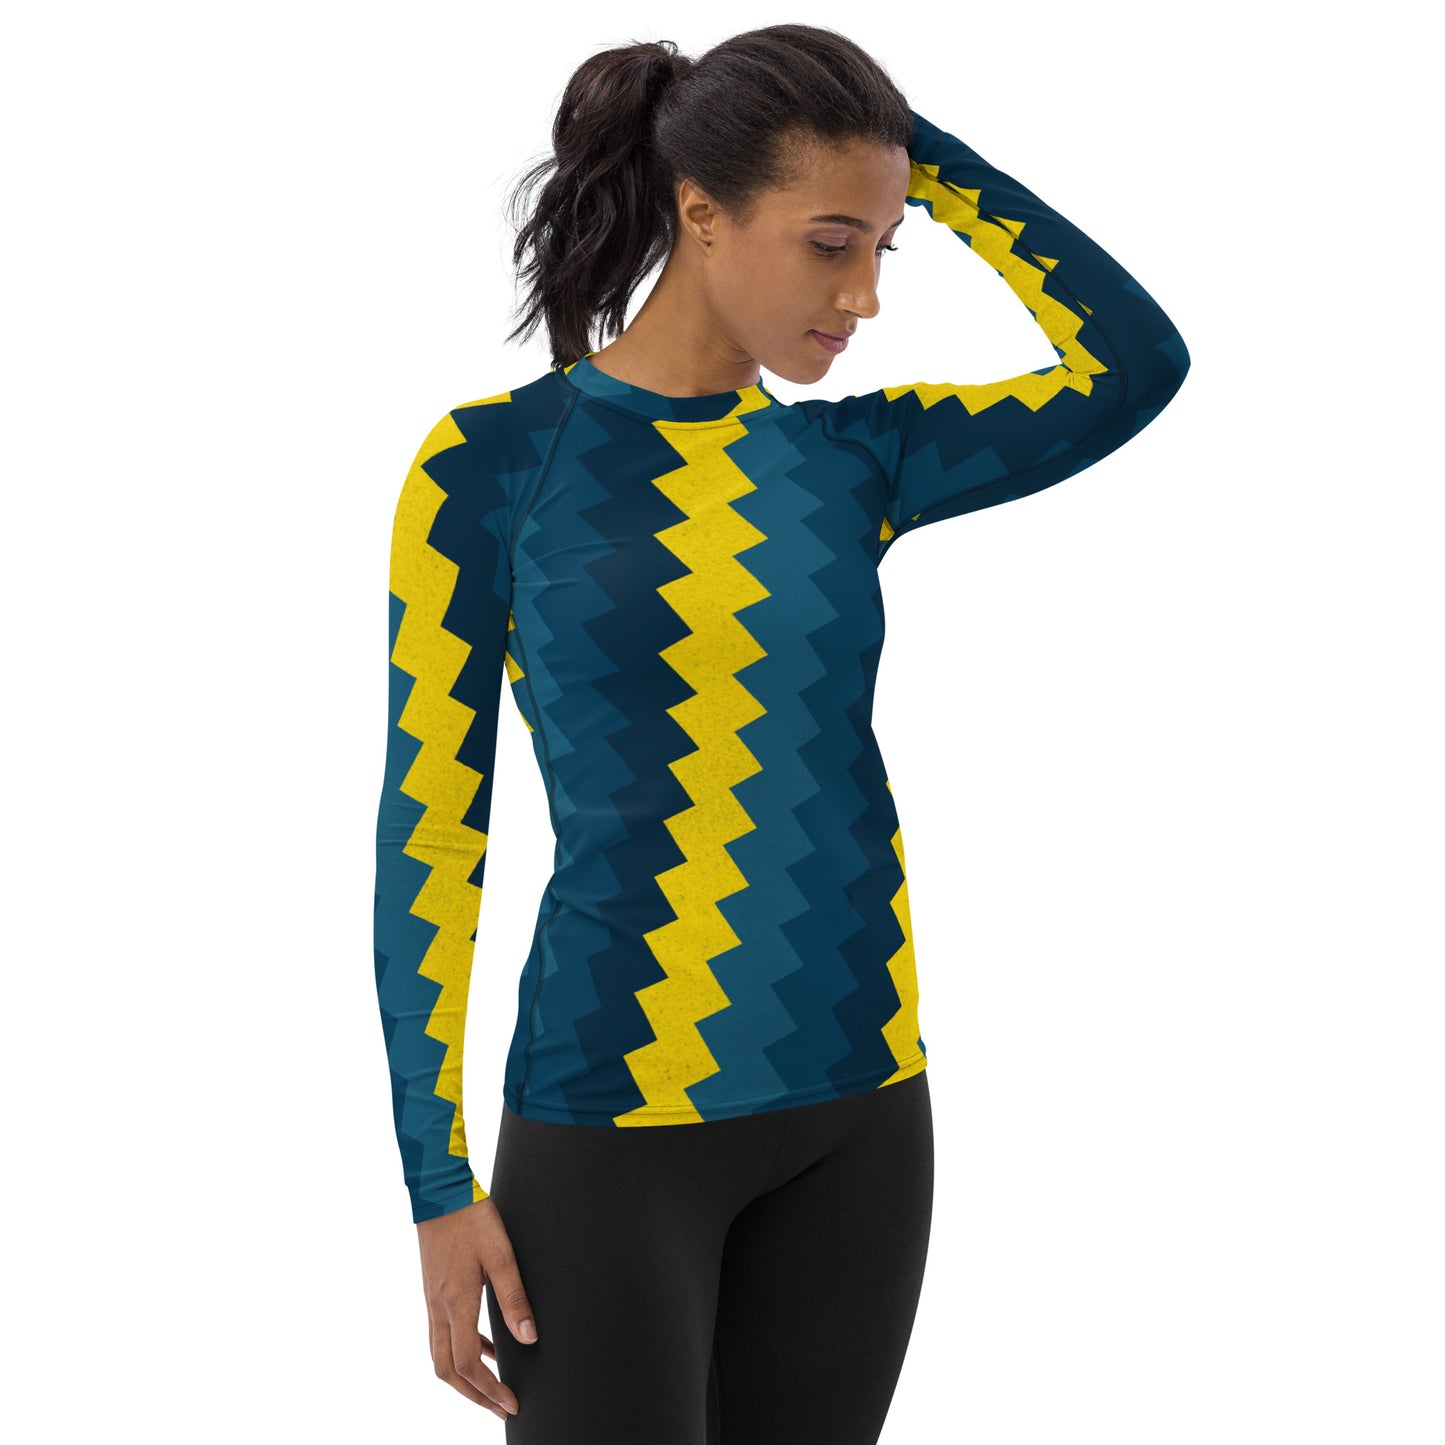 Surf in Style: Women's High-Performance Rash Guard - Electric Avenue